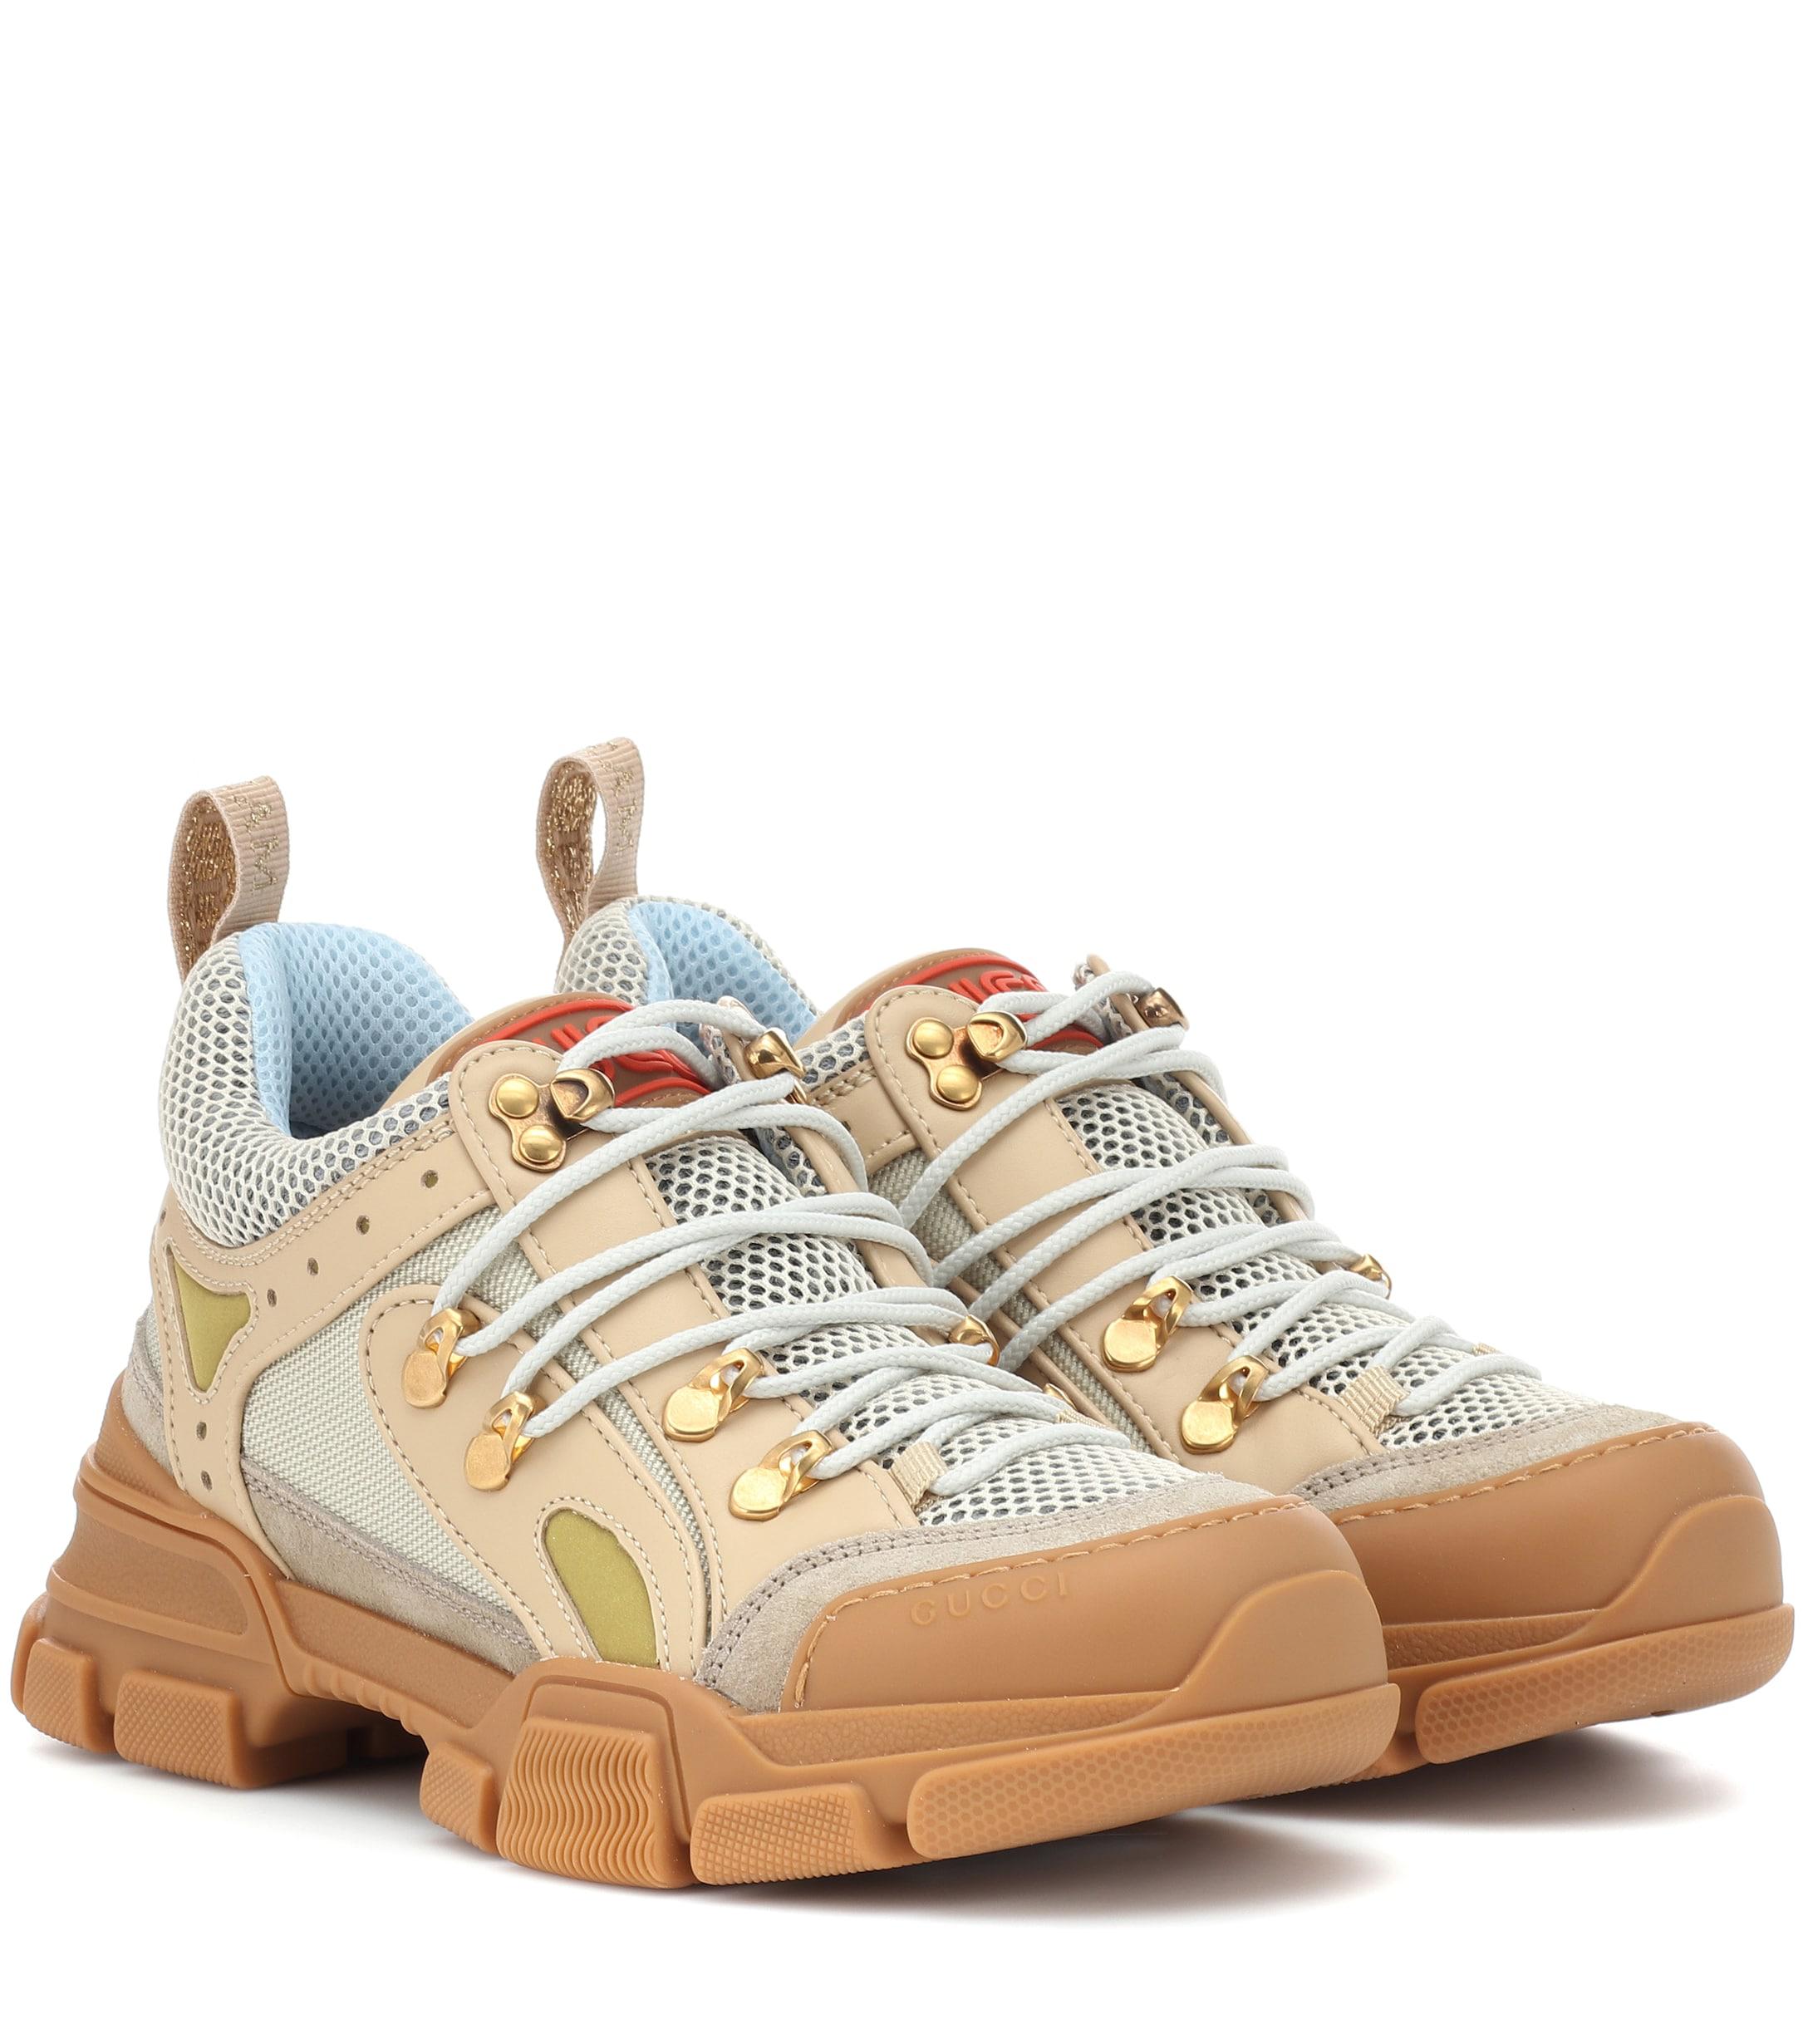 Gucci Flashtrek Sneakers in White - Lyst